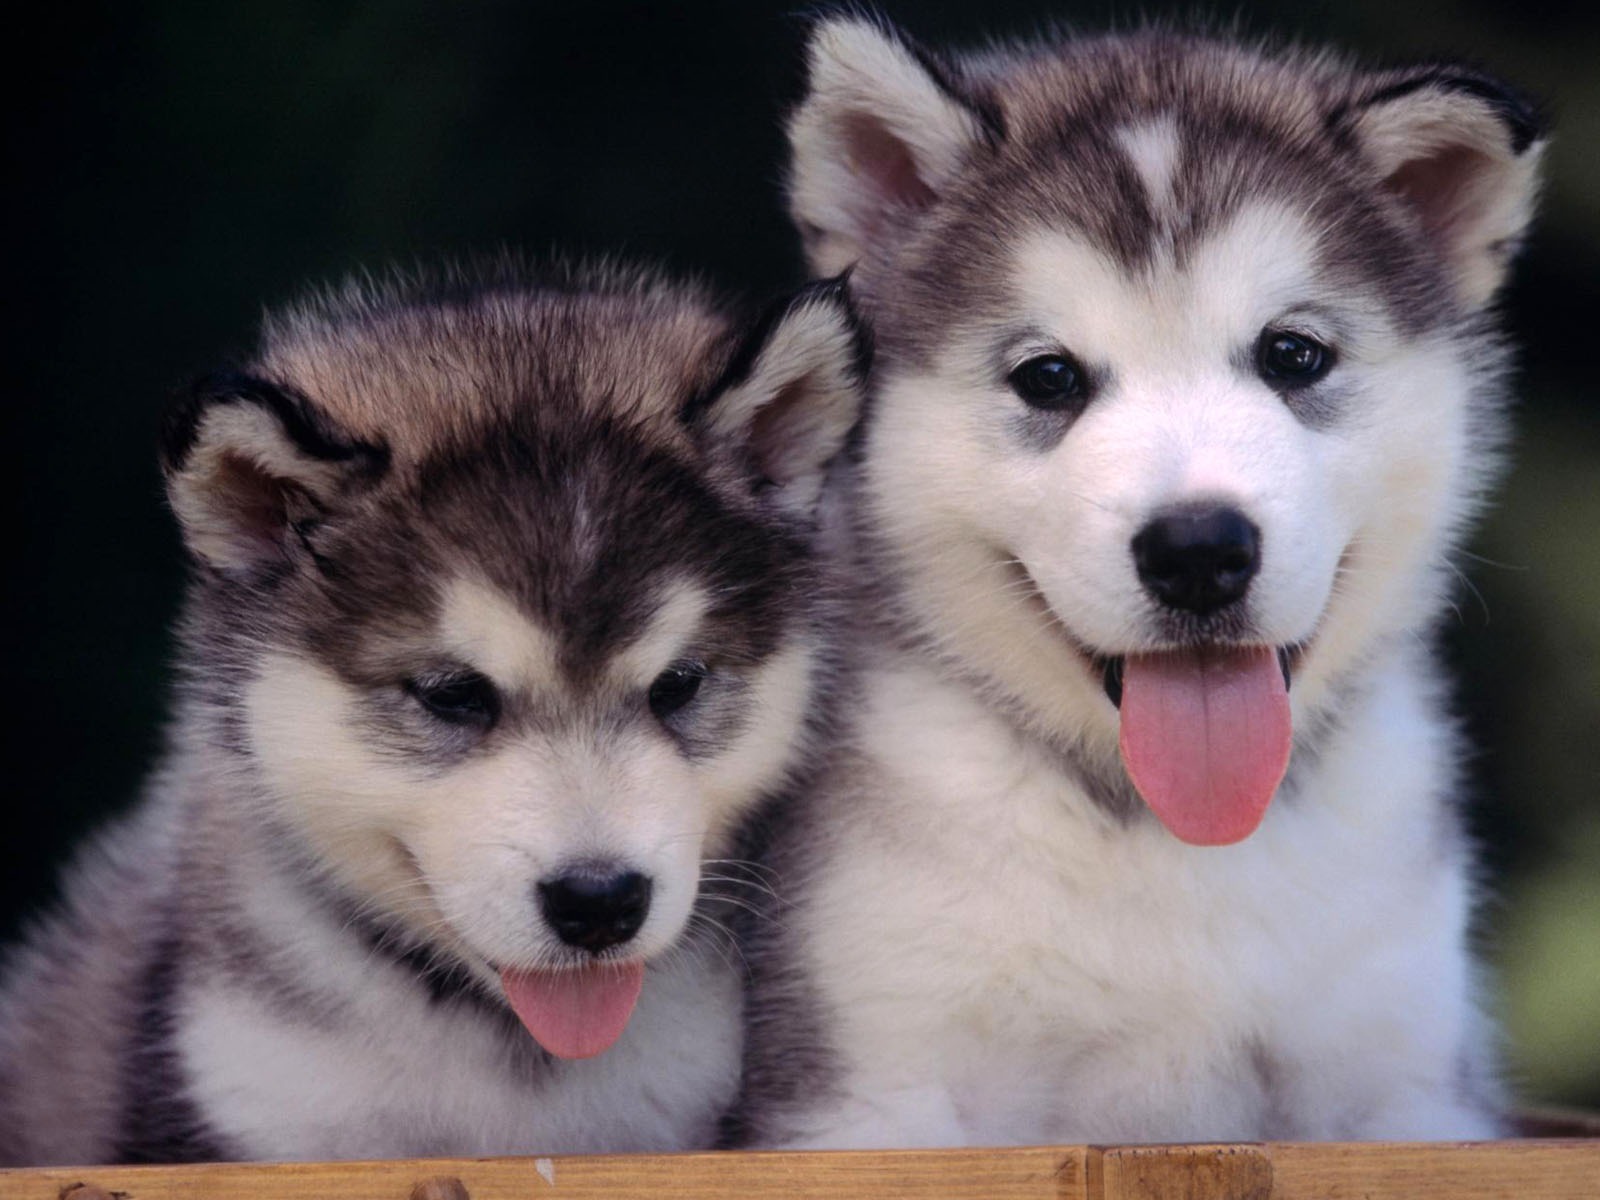 Puppy Photo HD wallpapers (2) #20 - 1600x1200